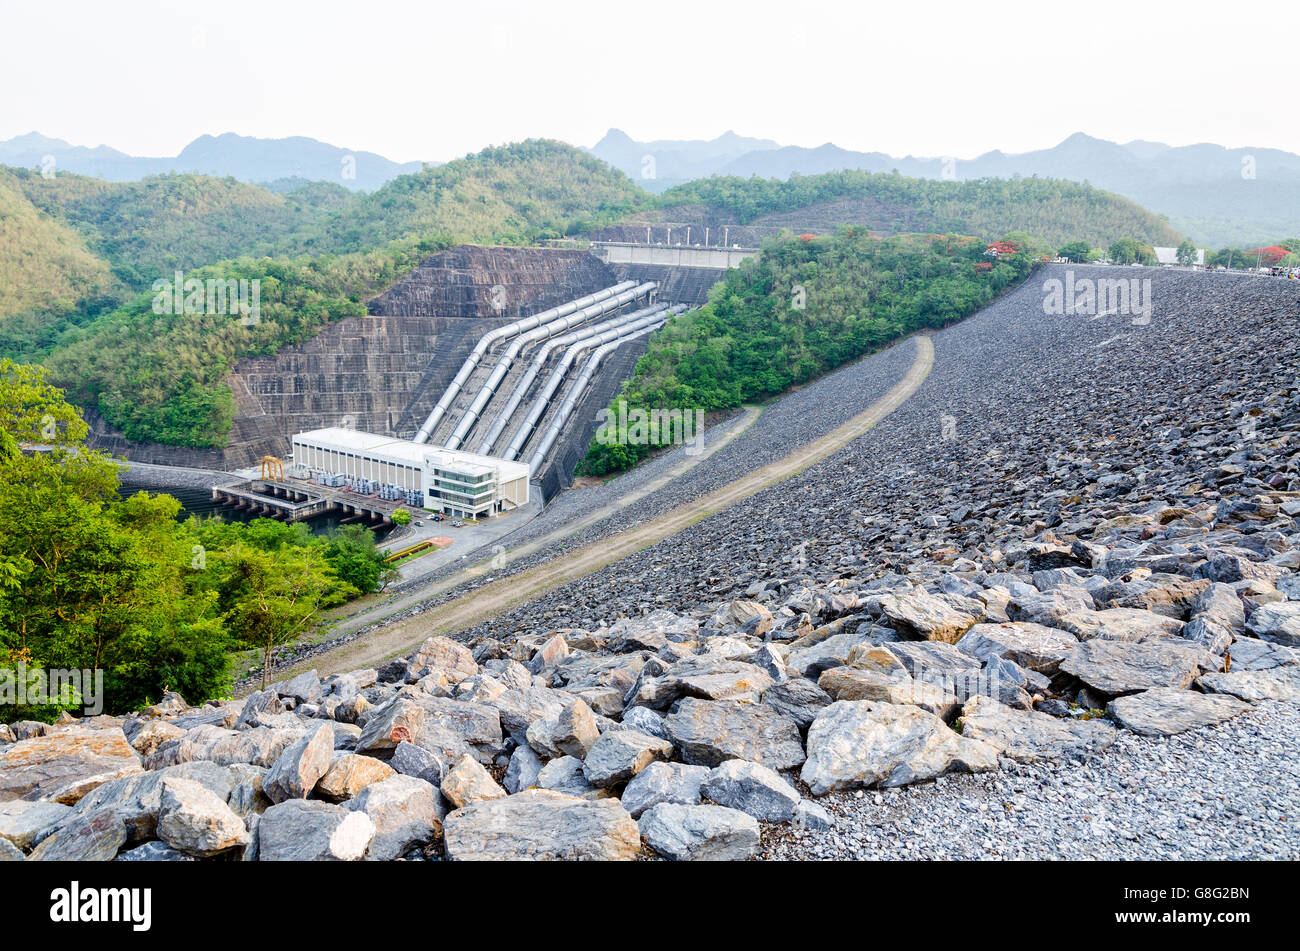 Hydroelectric power stations at Khuean Sinakharin Dam in Kanchanaburi Province, Thailand Stock Photo